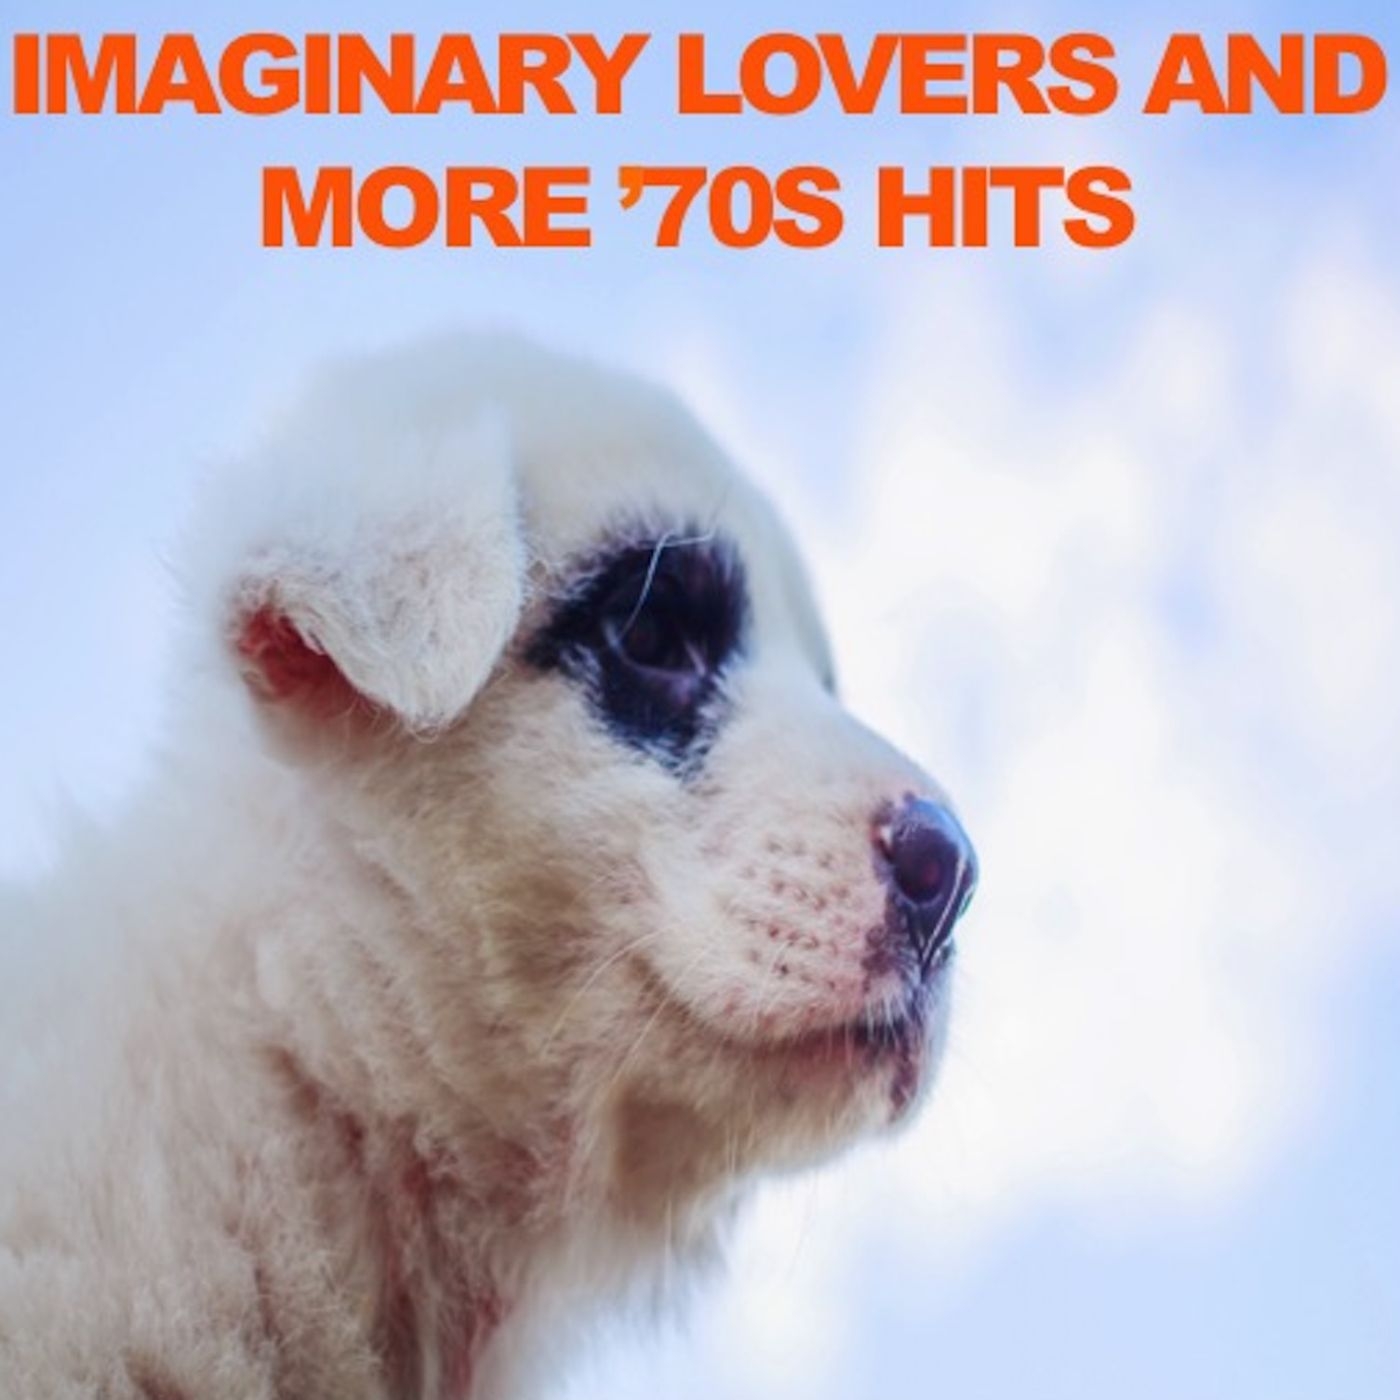 Imaginary Lovers and More: '70s Hits